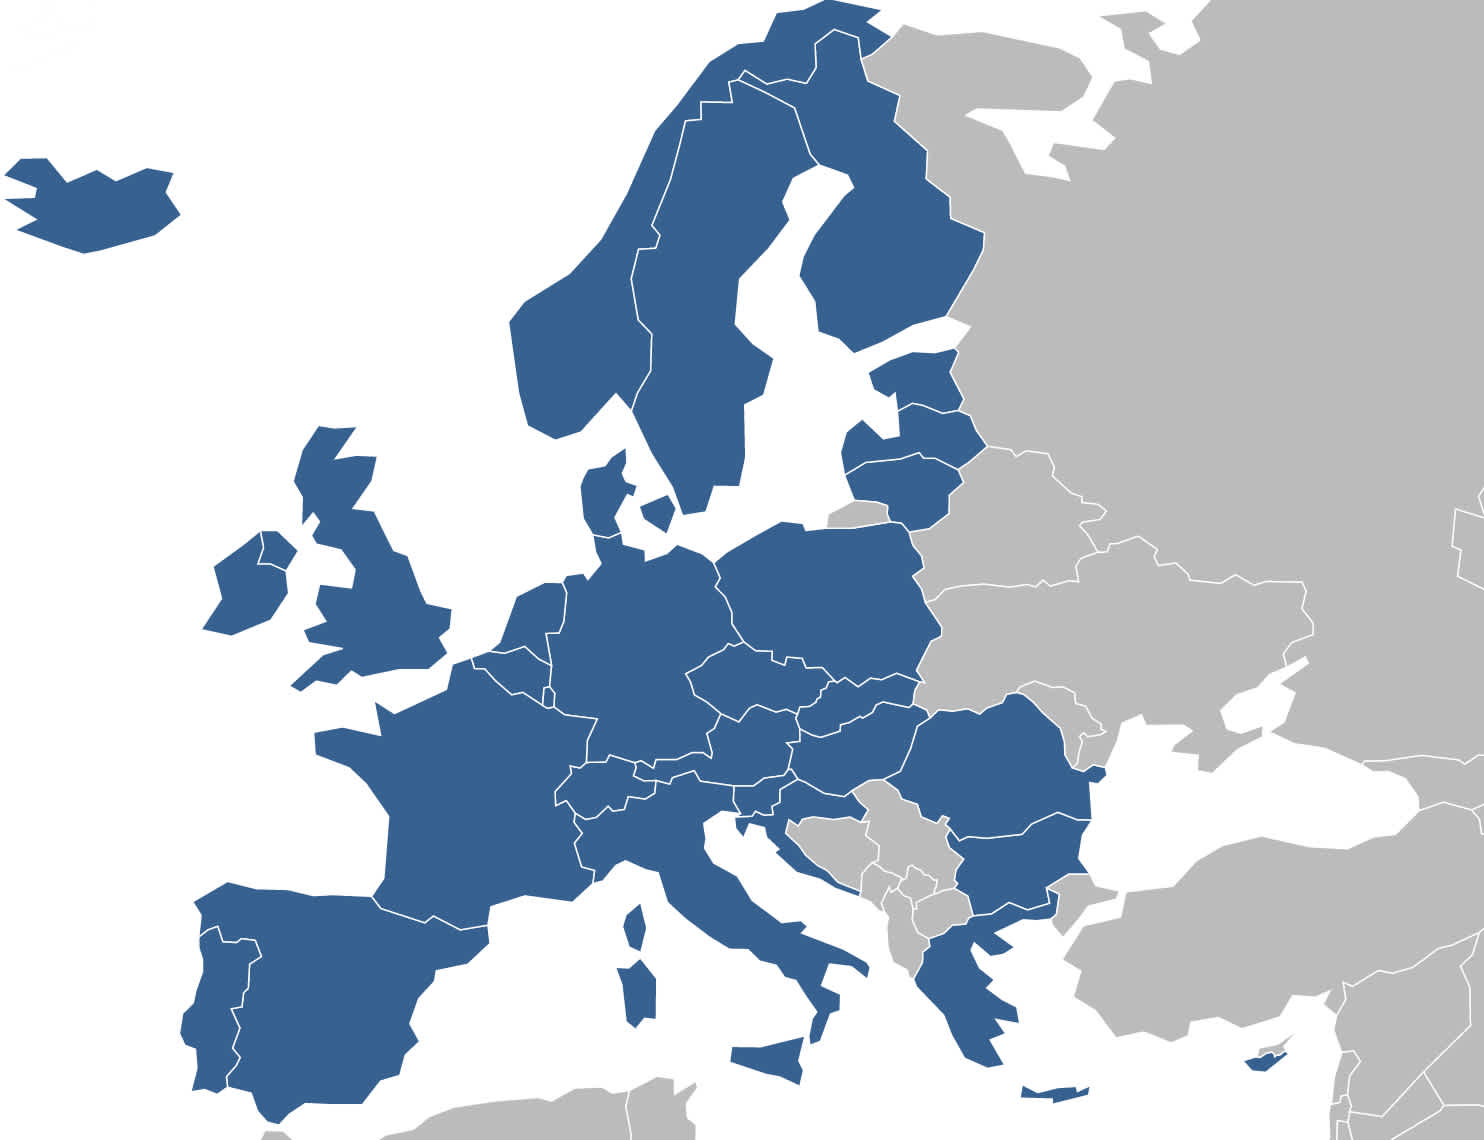 guides > images > sepa-countries-map